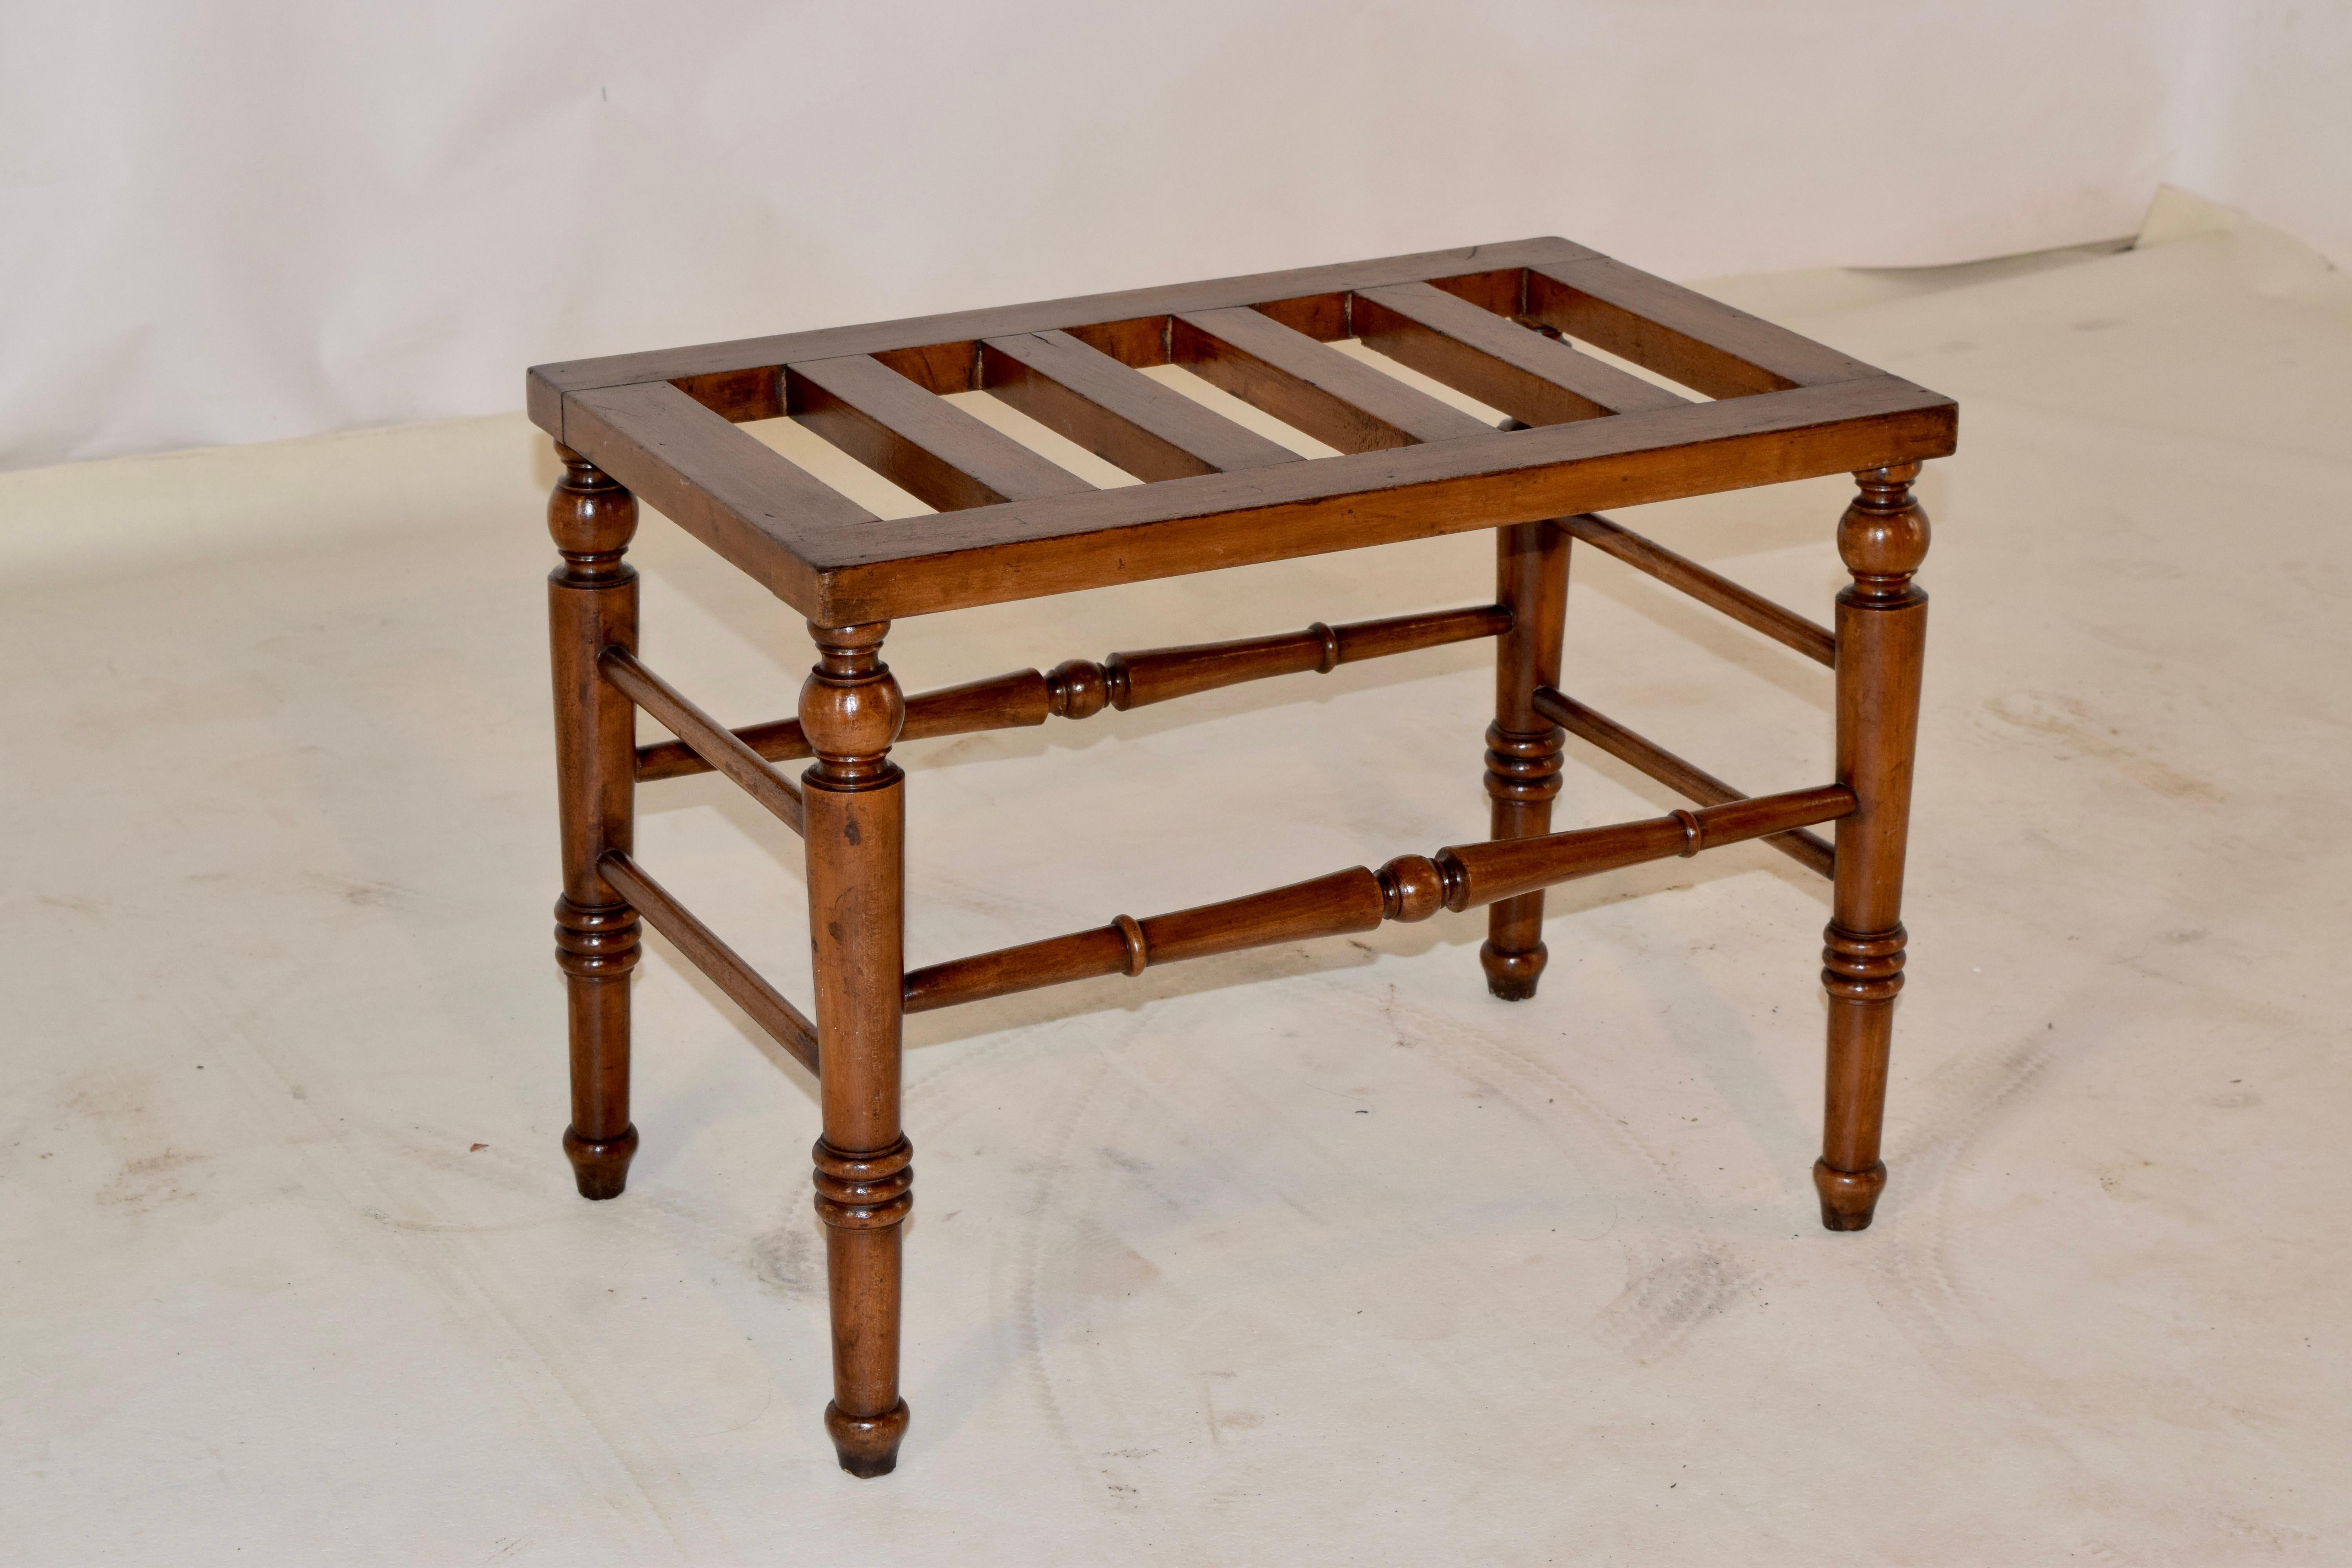 19th century English luggage stand made from Mahogany. The top is slatted, and ia supported on hand turned legs, which are slightly splayed and joined by stretchers.